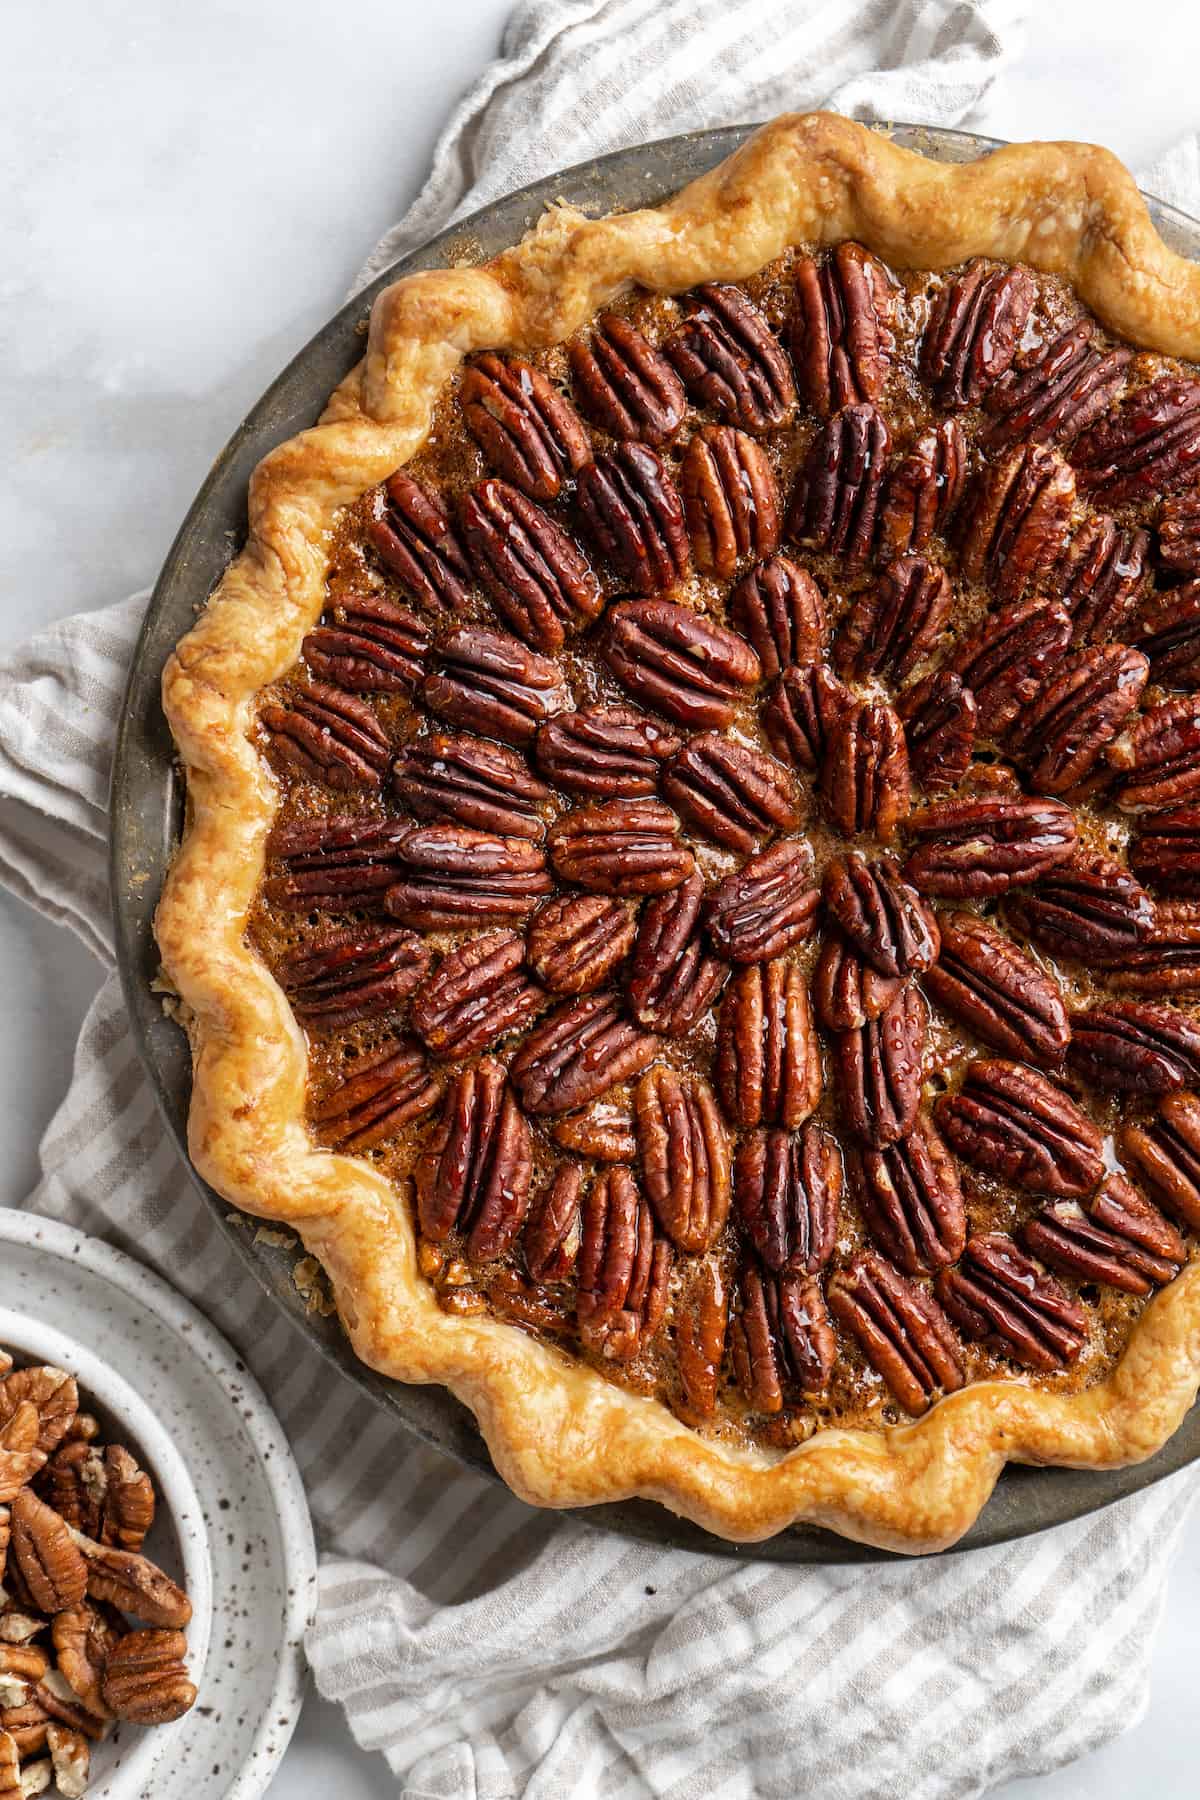 Pecan halves spread out on top of a baked pecan pie.